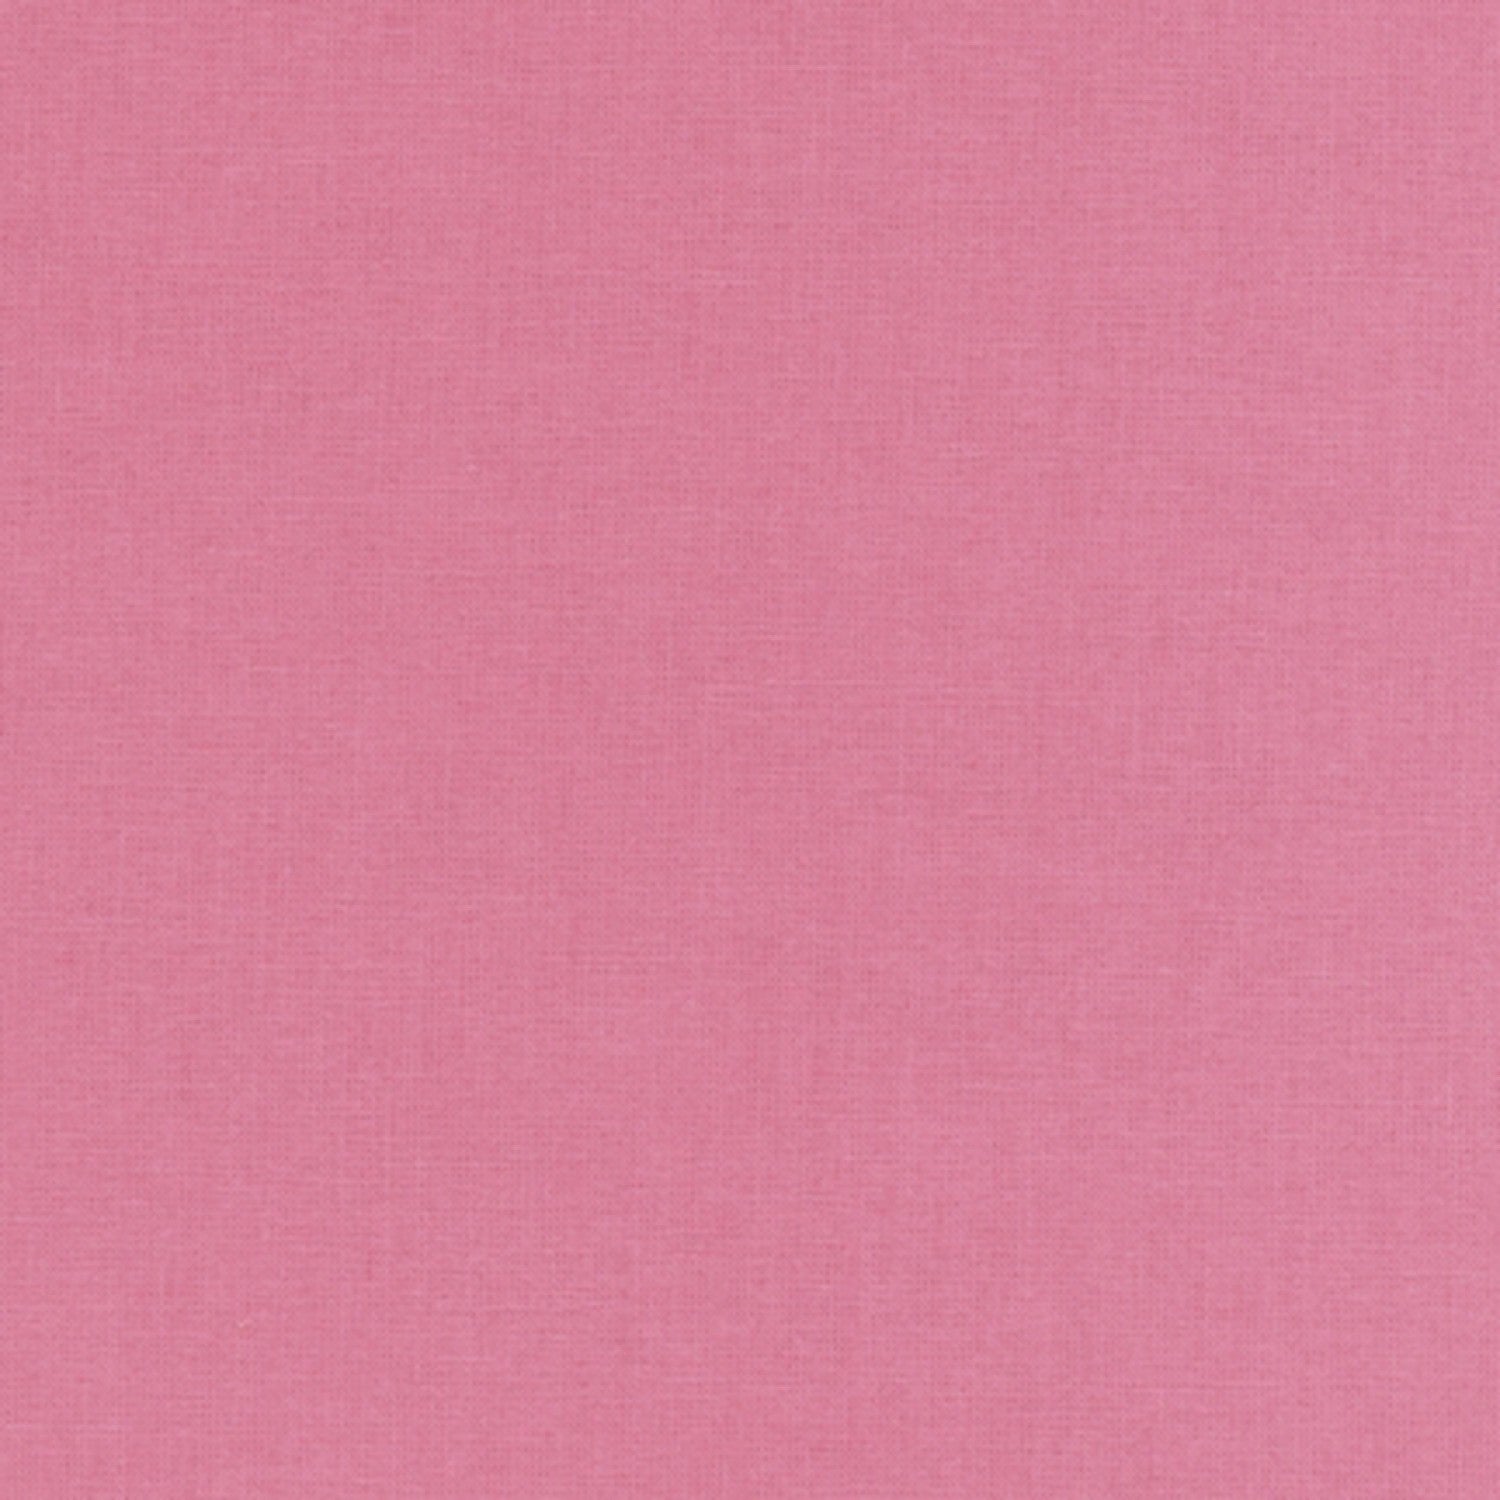 Kona Cotton Solids Rose fabric thumbnail image for true color reference